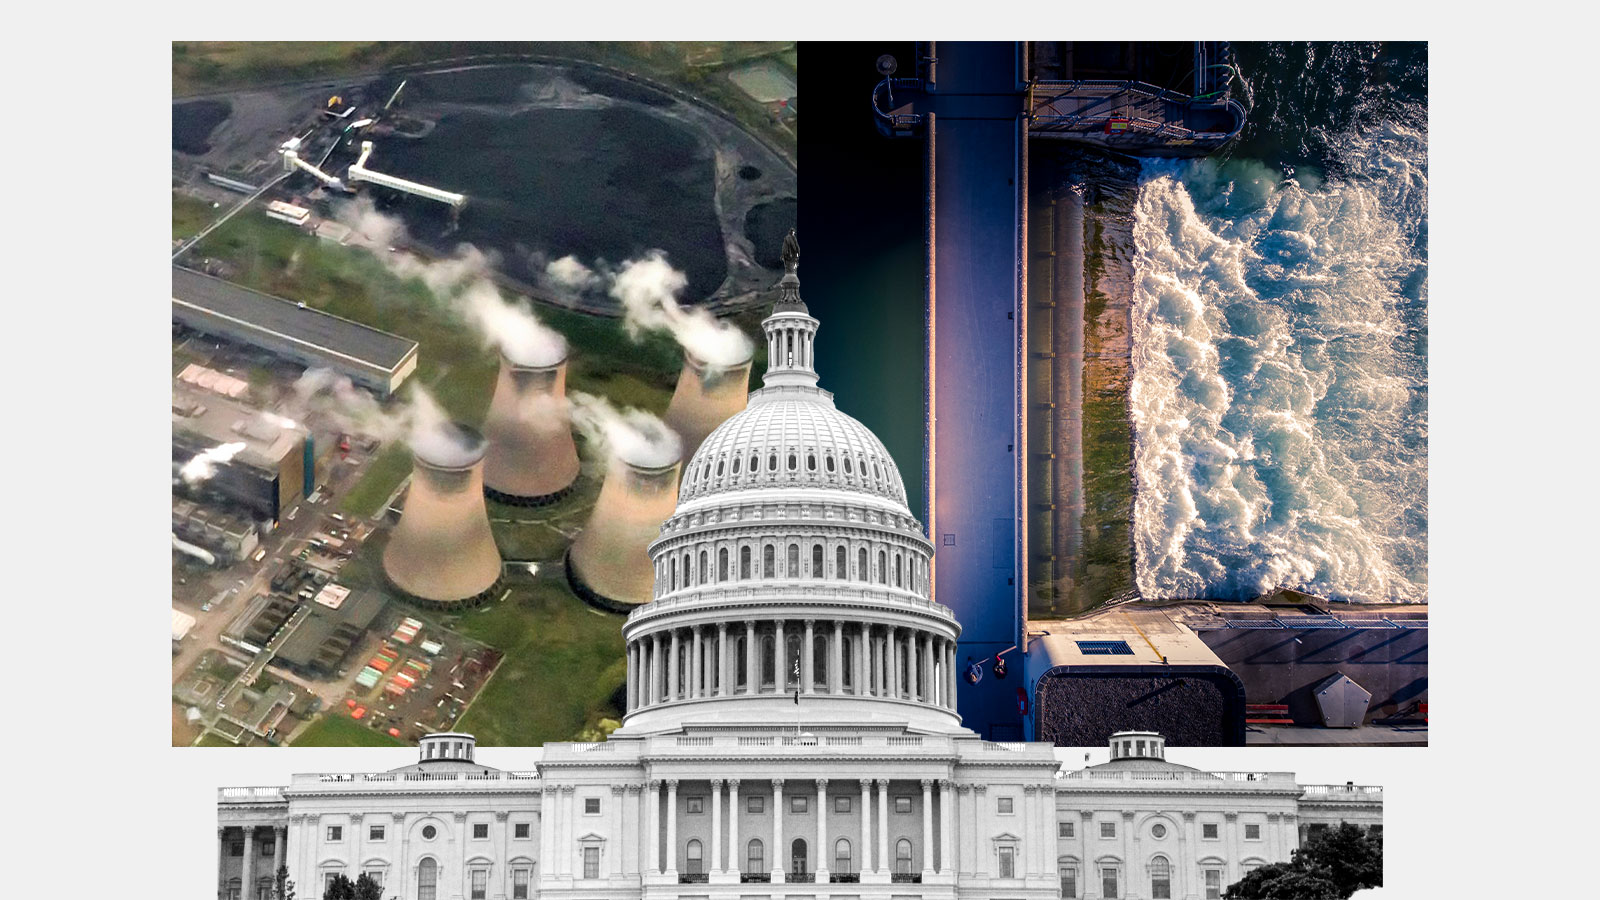 Capitol building in front of an image of nuclear cooling towers and a dam